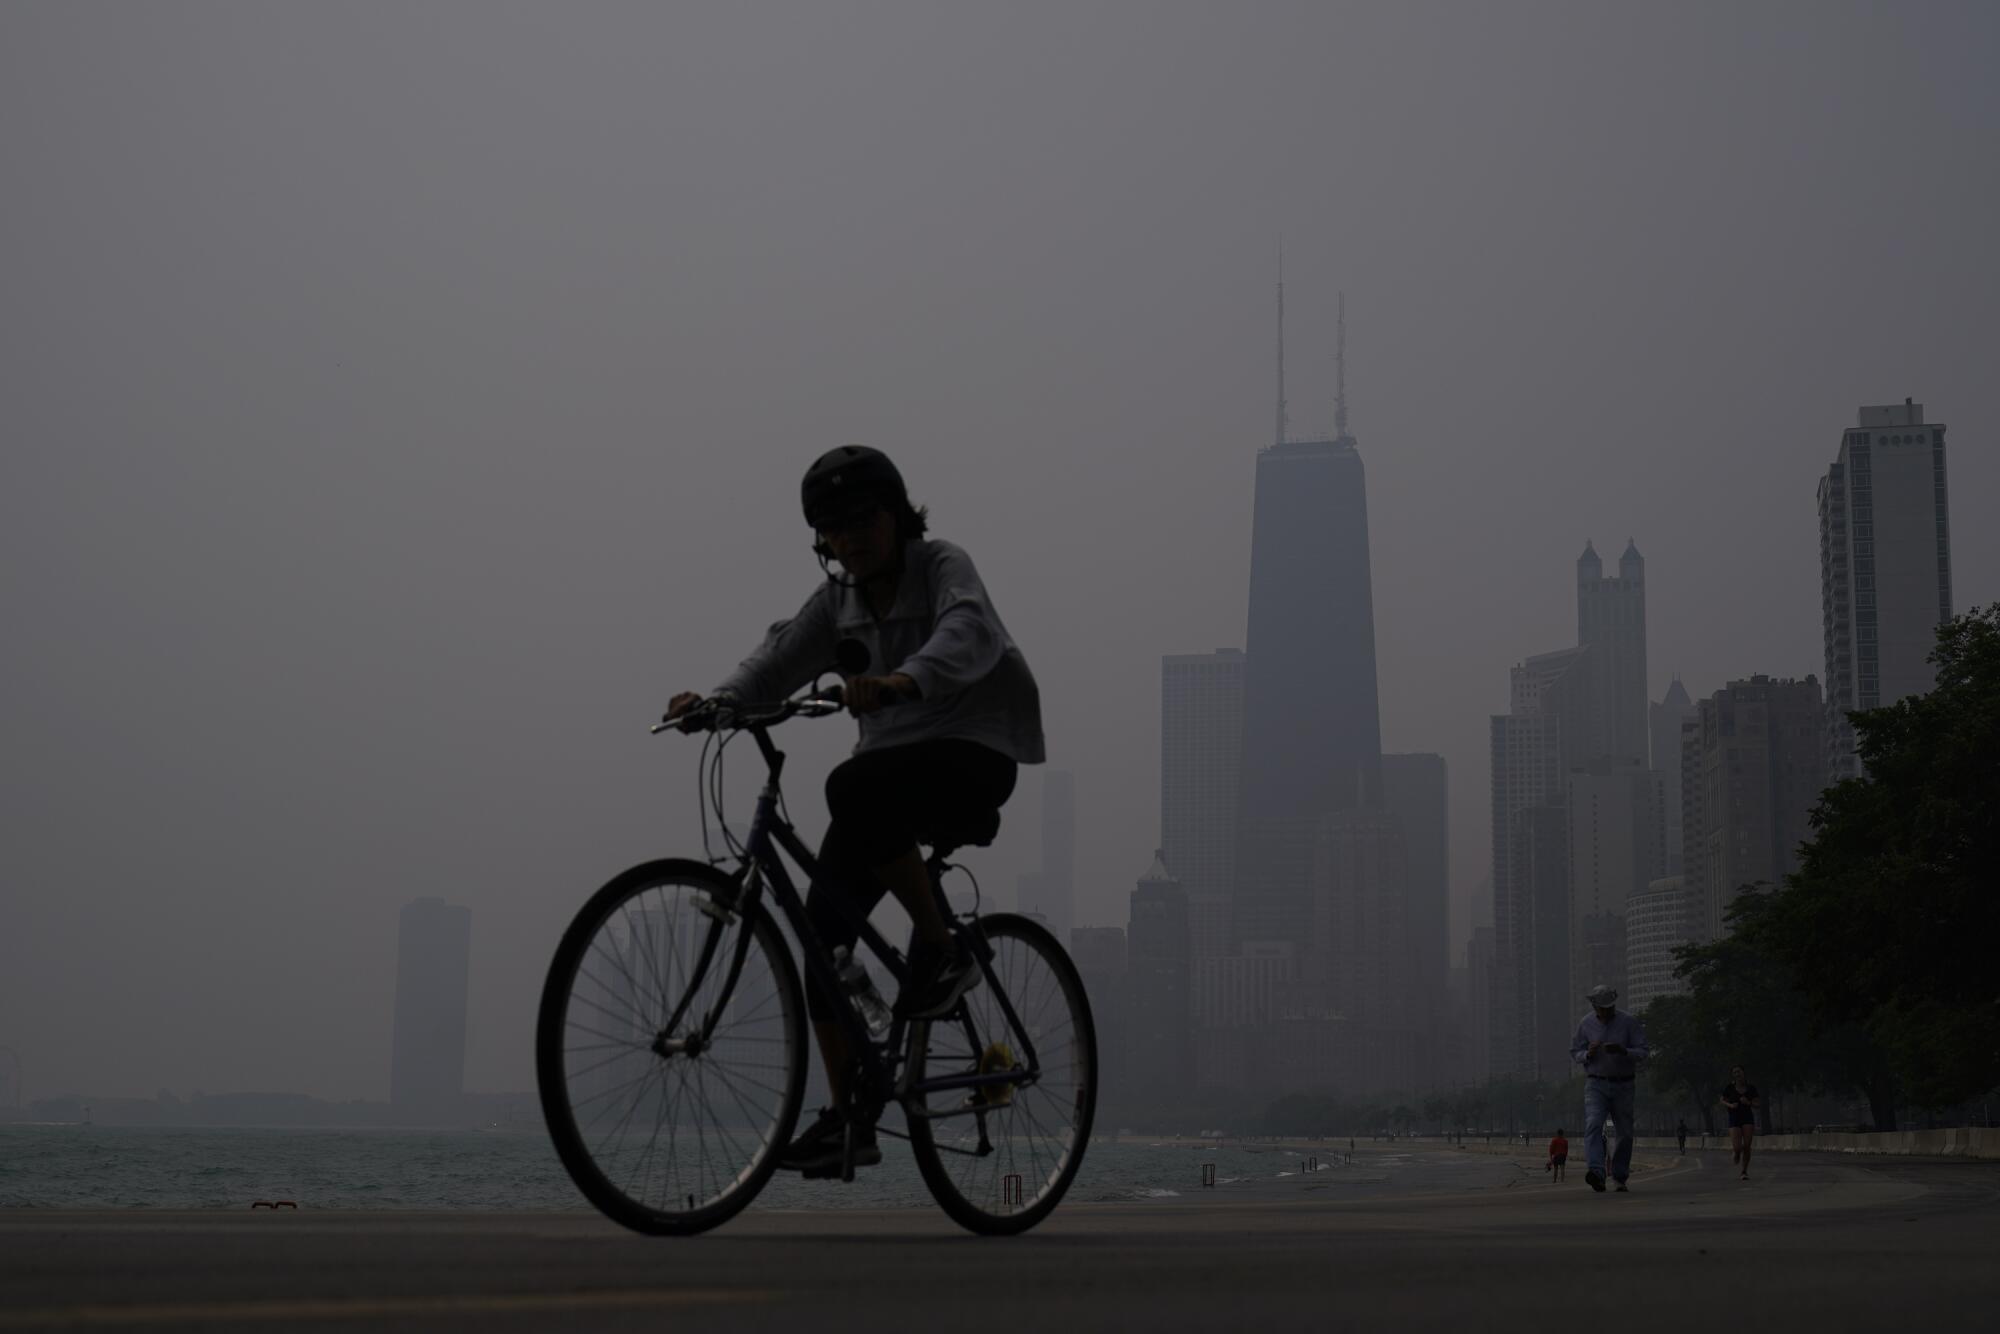 A cyclist riding in a dark haze against a partially obscured city skyline.